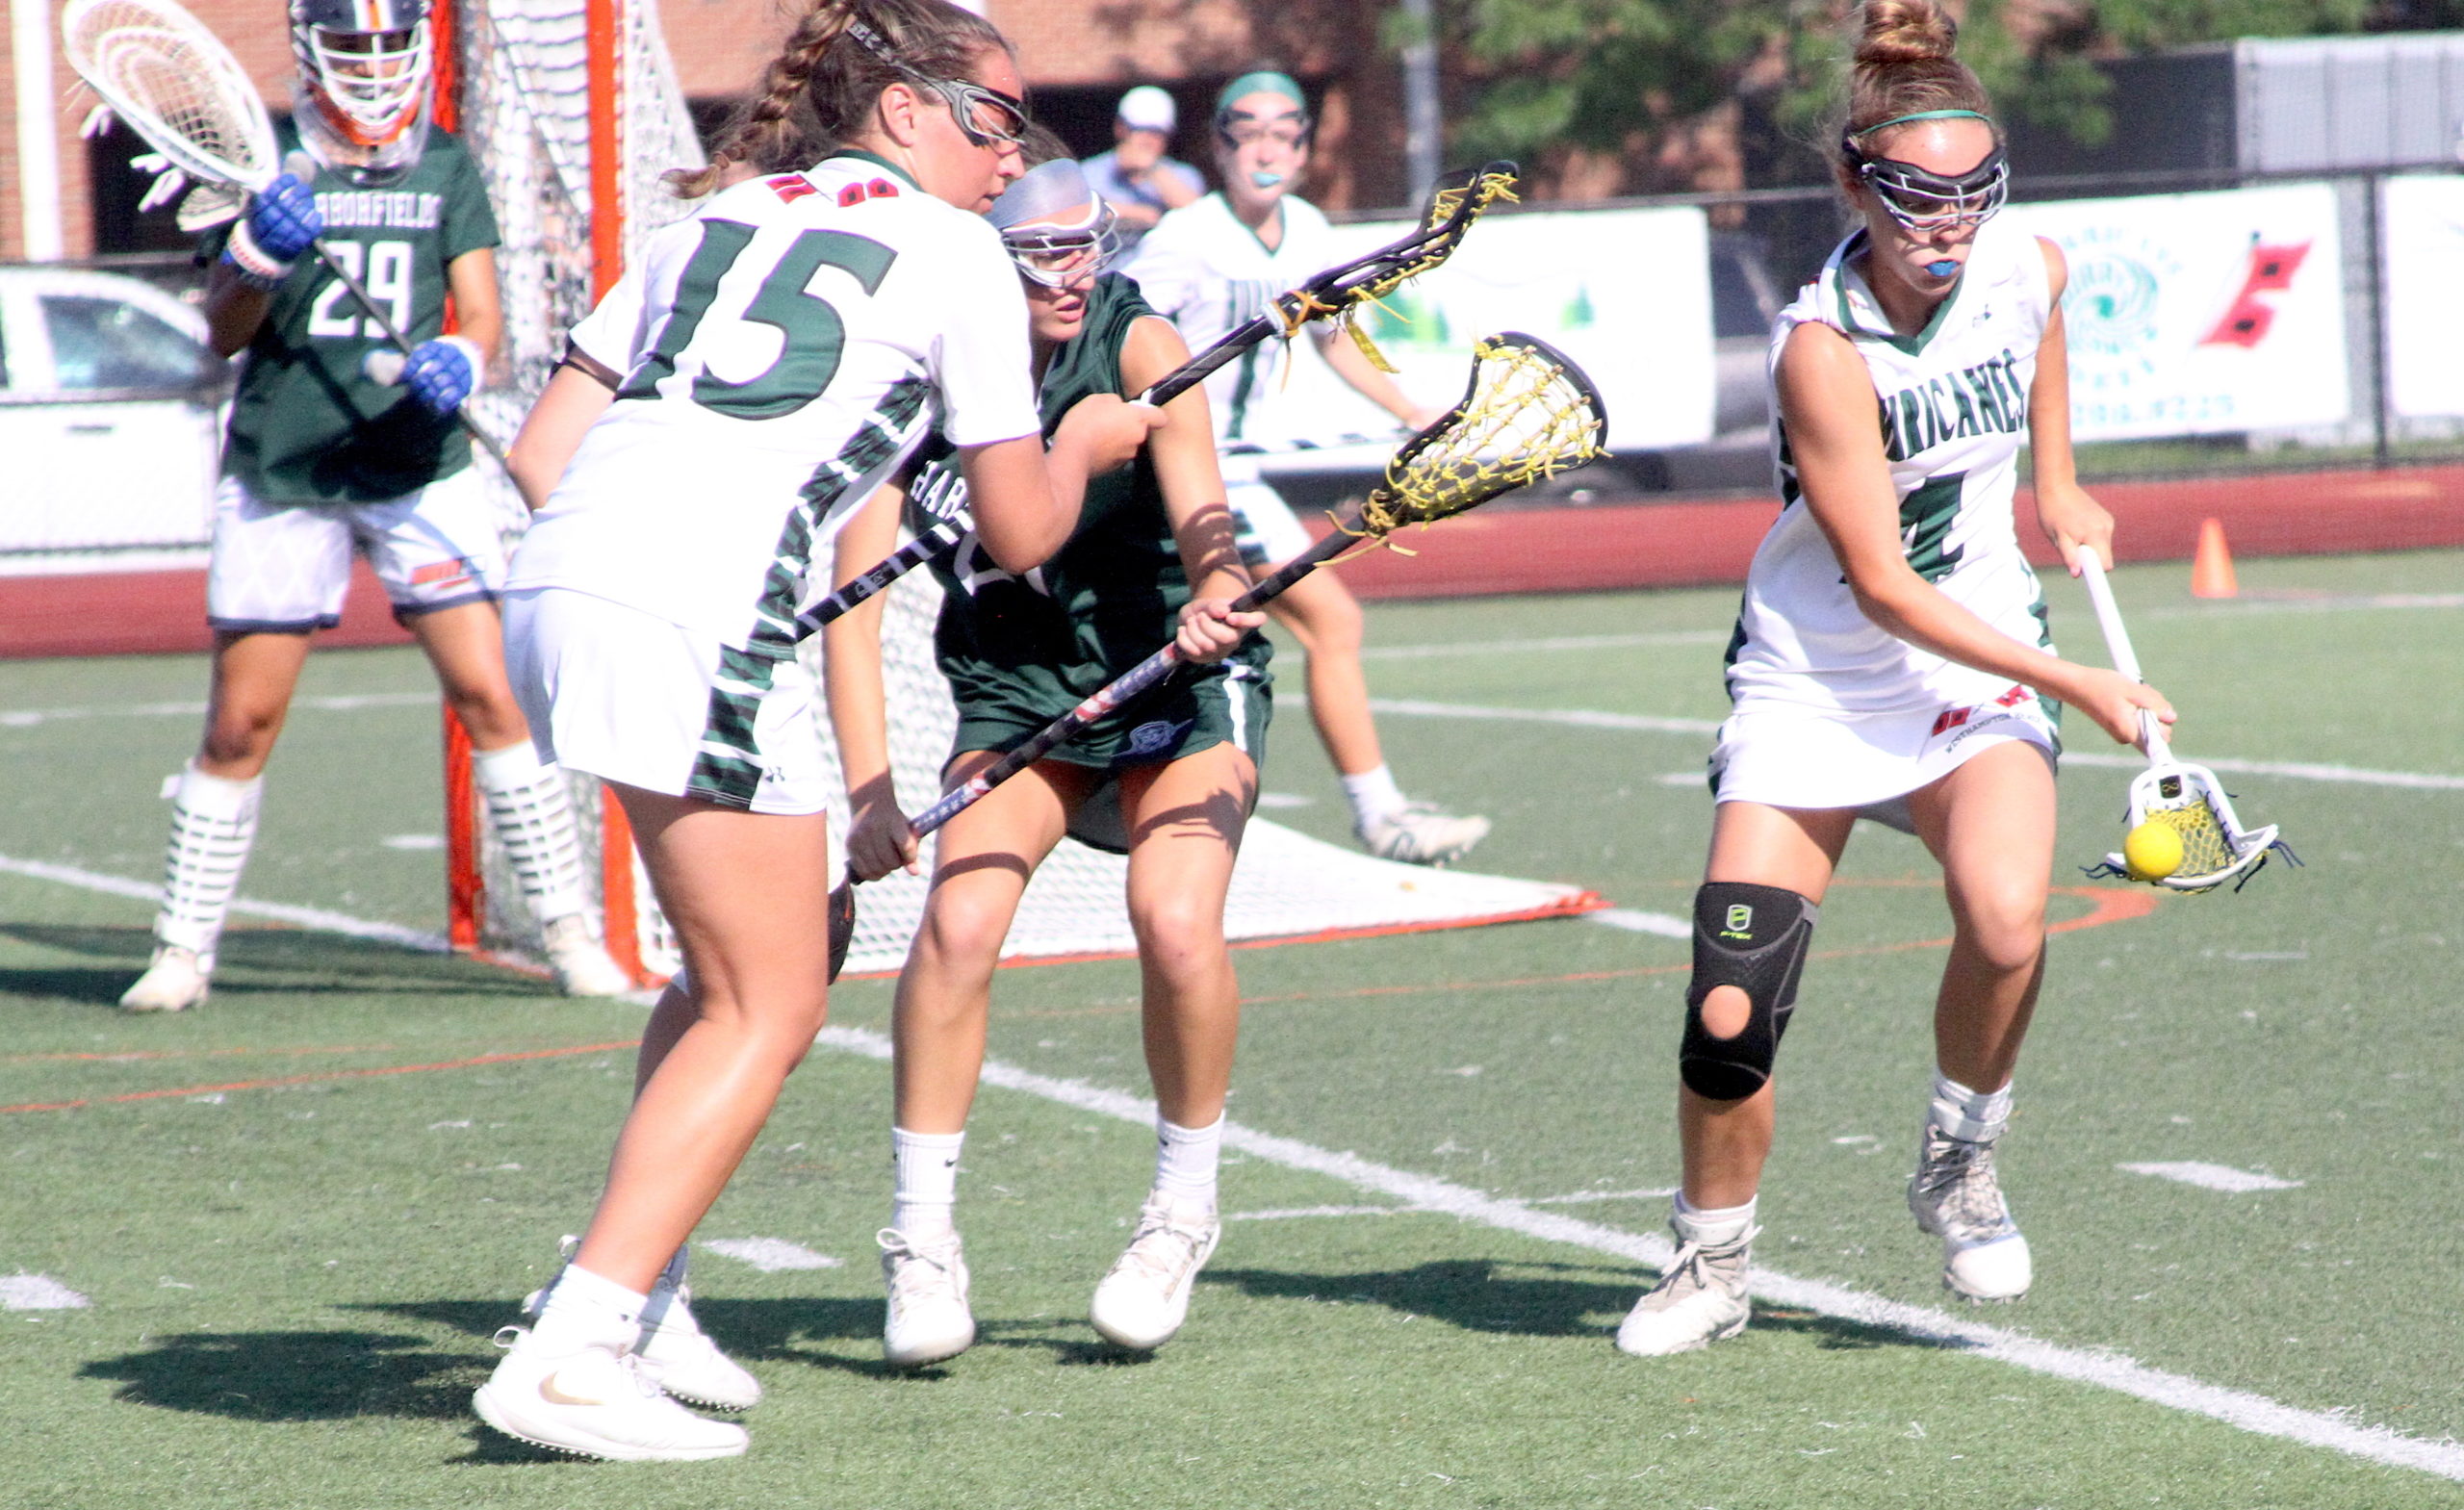 Westhampton Beach seventh-grader Ava Derby scoops up a ground ball to regain possession for the Hurricanes. DESIRÉE KEEGAN